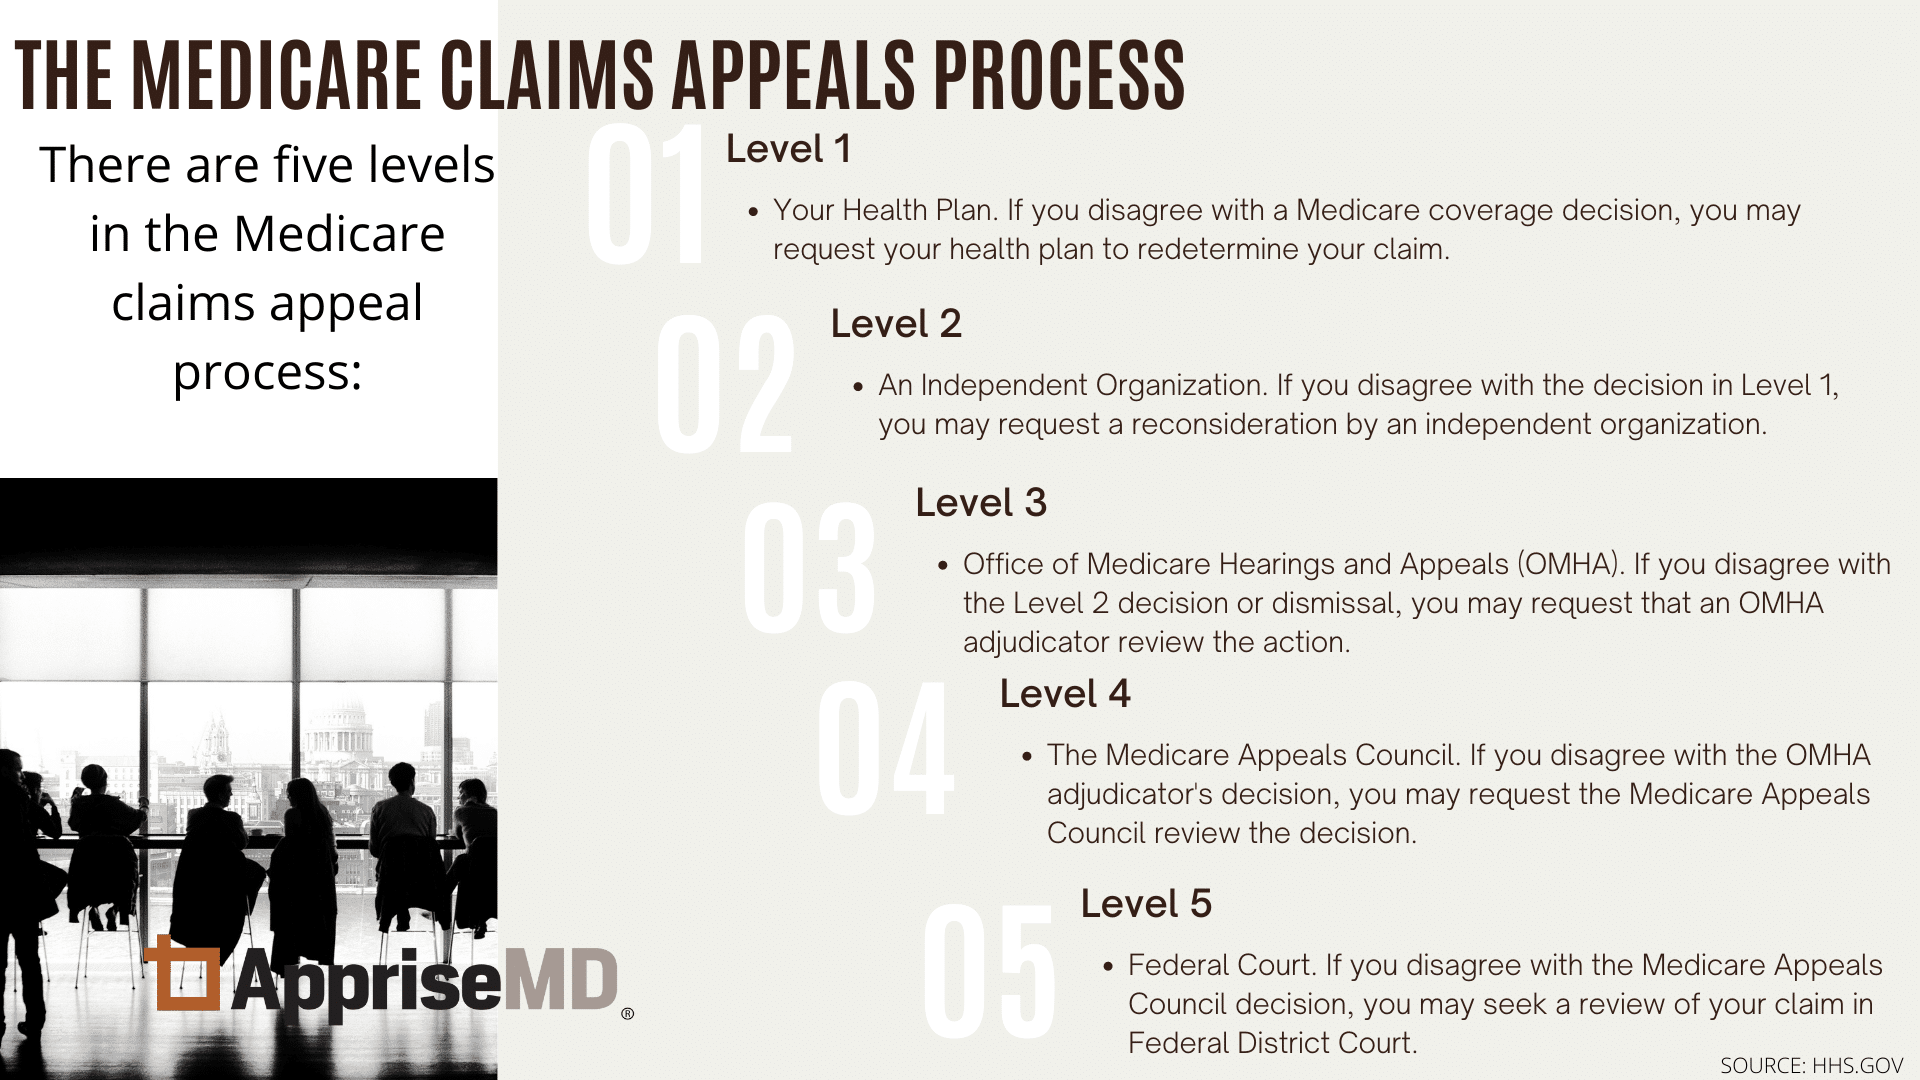 The Medicare Claims Appeals Process
